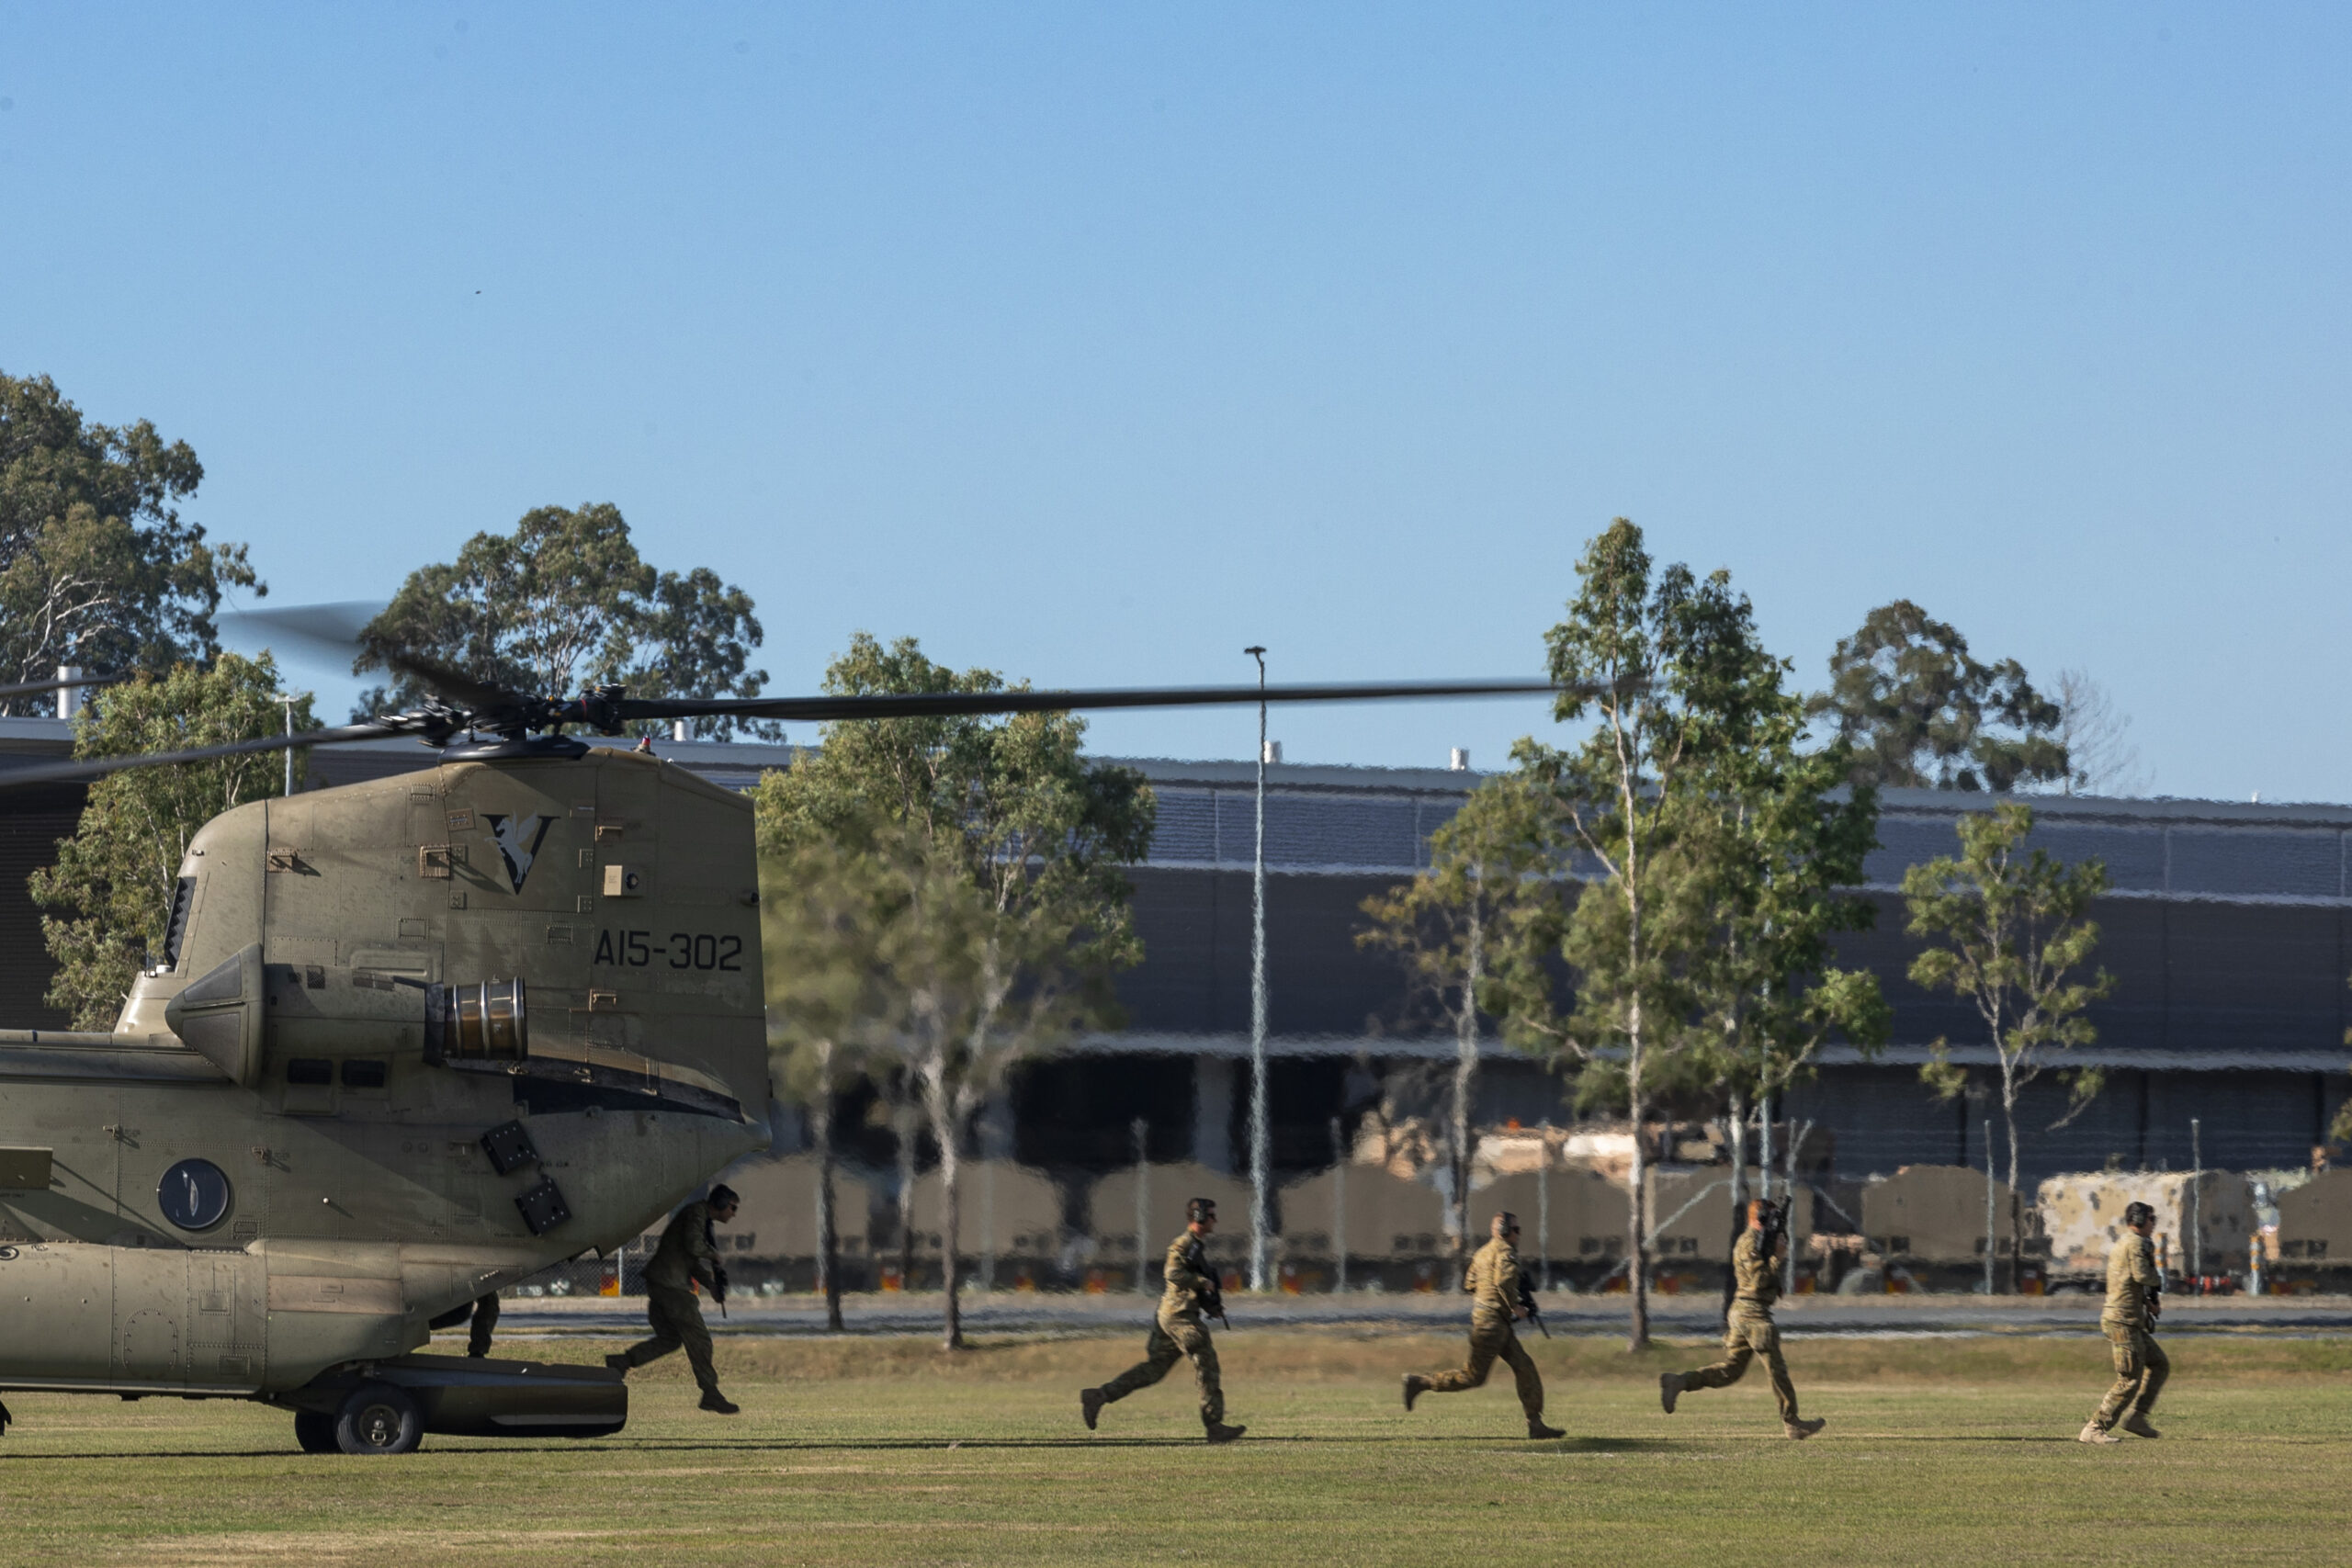 Australian Army riflemen from Alpha Company of the 8th/9th Battalion, The Royal Australian Regiment rehearse disembarking drills off a CH-47 Chinook during an Air Mobile Operation familiarisation and integration training exercise at Gallipoli Barracks, Brisbane. *** Local Caption *** Soldiers from Battle Group Ram, centred on, 8th/9th Battalion, The Royal Australian Regiment (8/9 RAR), took part in CH-47 Chinook integration training at Gallipoli Barracks, Brisbane, in June. The activity was supported by 5th Aviation Regiment. Soldiers conducted loading and offloading drills, refining their skills for air mobile operations. The training enhances Battle Group Rams readiness for major exercises such as Exercise Diamond Strike or operational deployments.